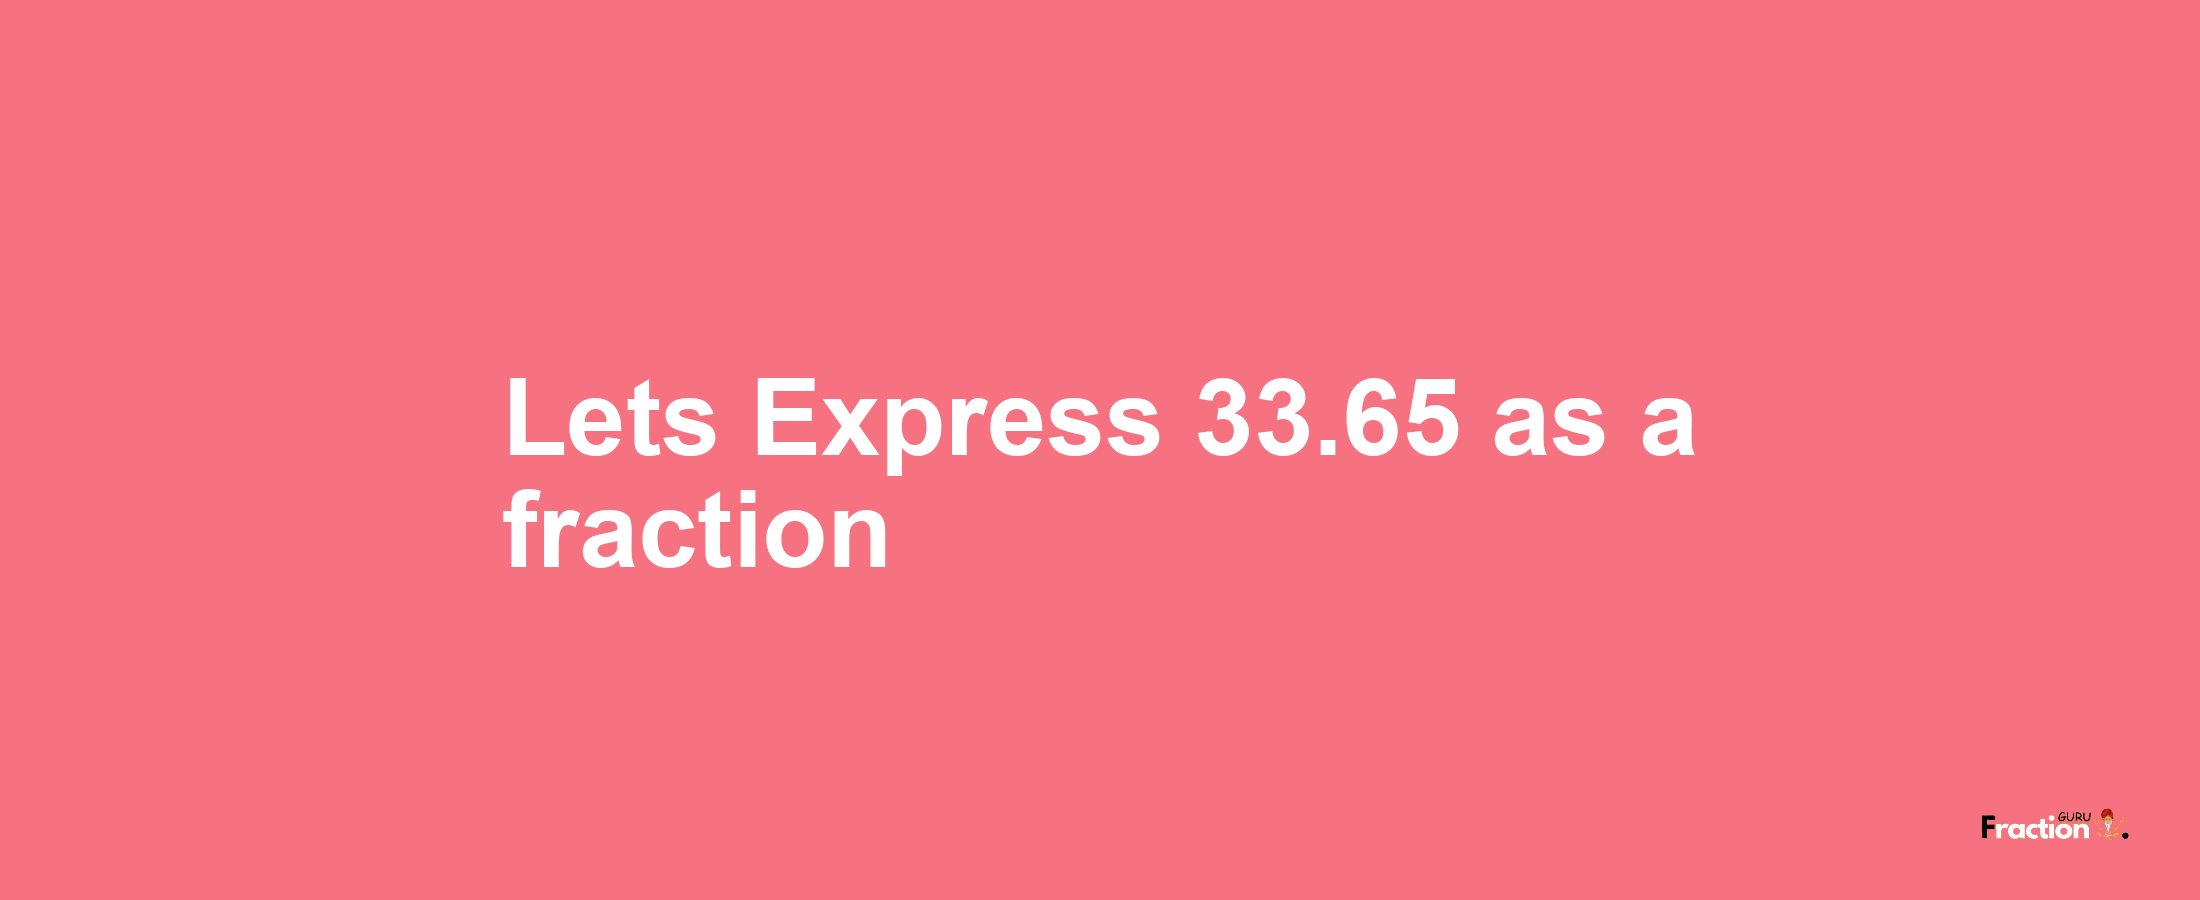 Lets Express 33.65 as afraction